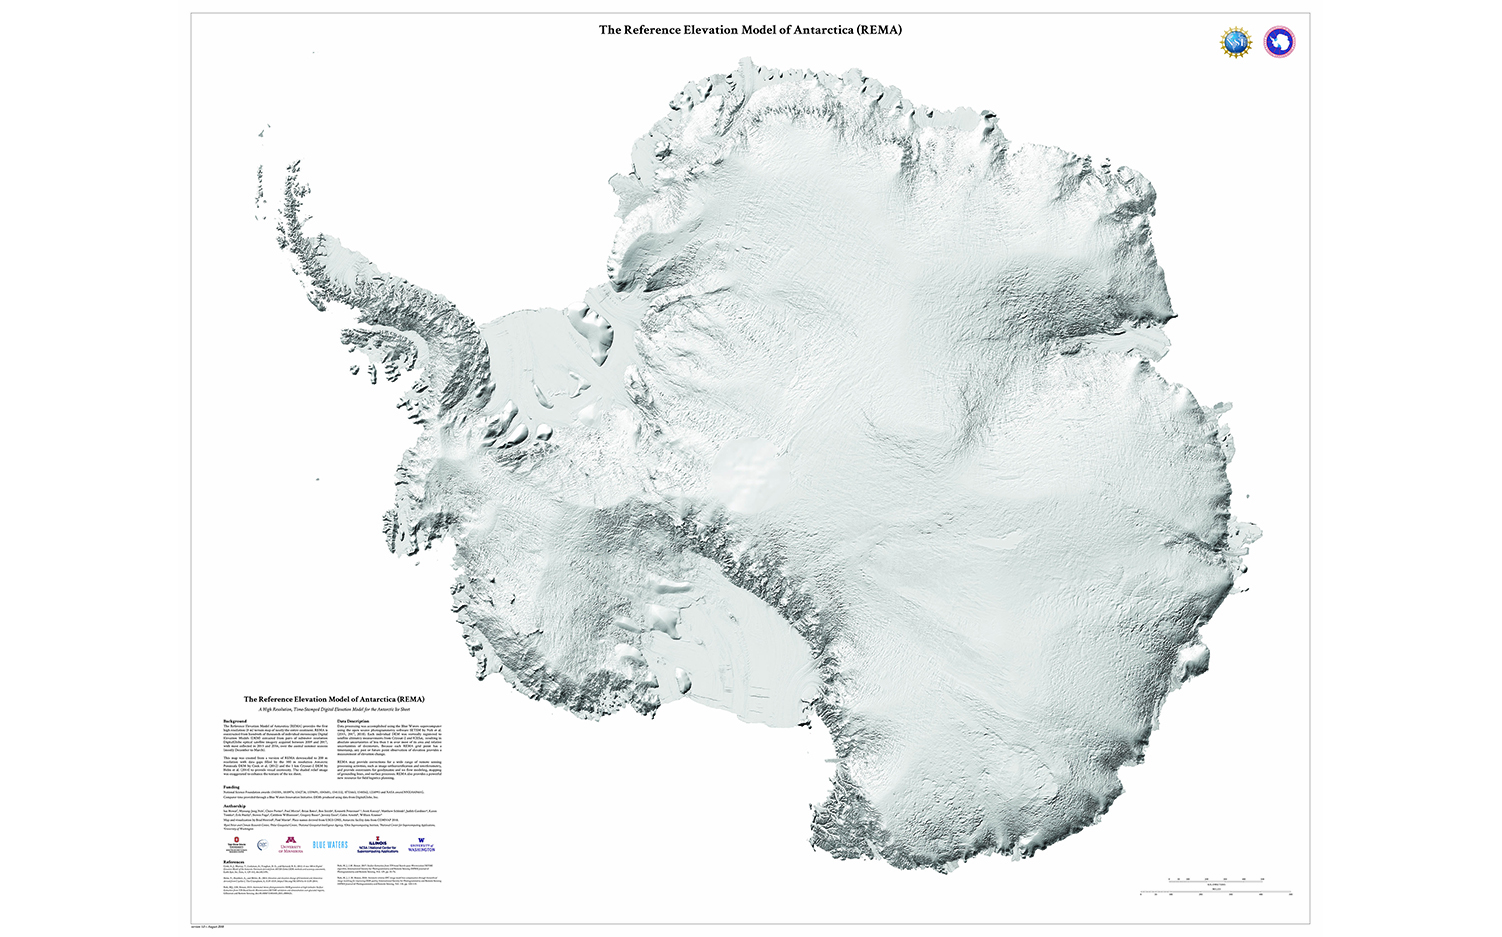 New HighRes Map of Antarctica Shows the Icy Continent in Astonishing